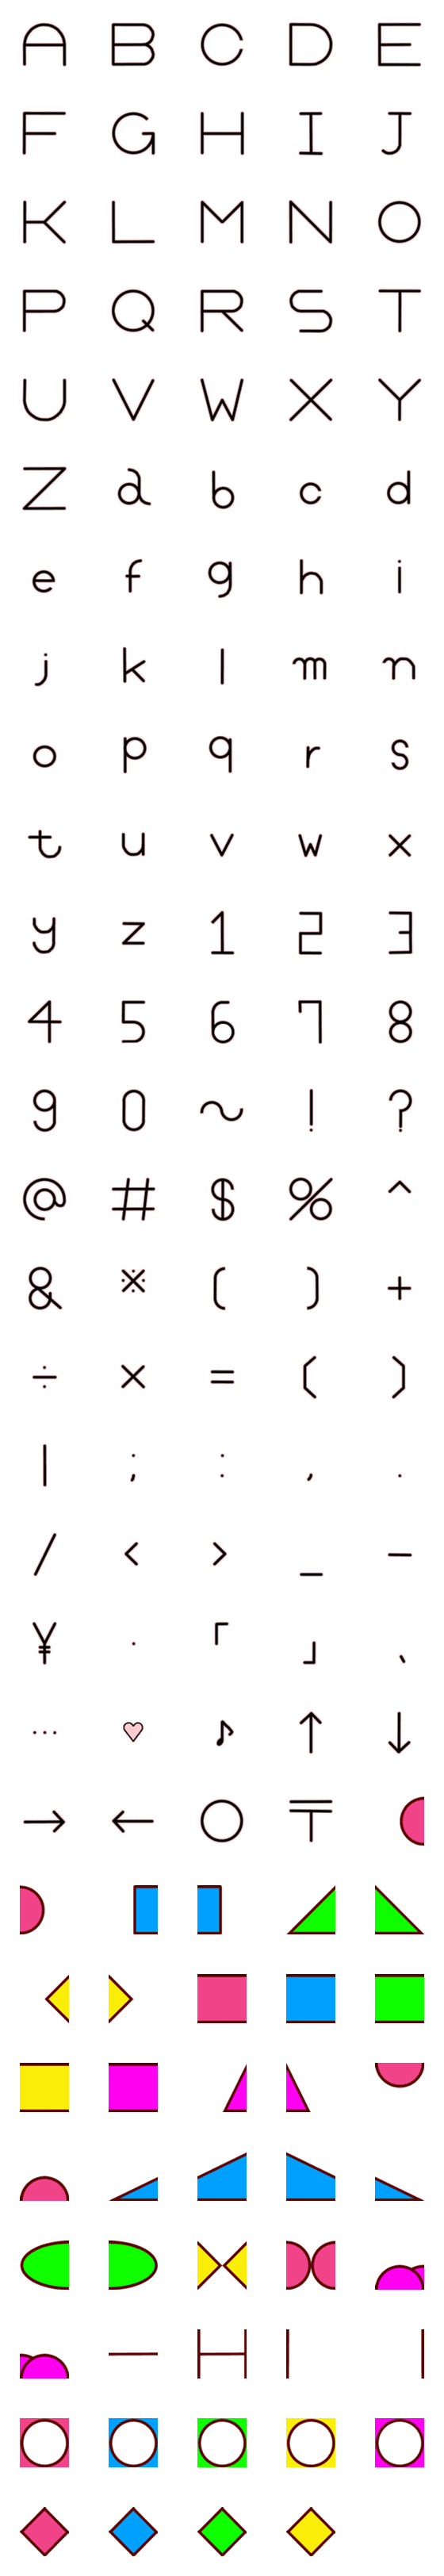 [LINE絵文字]シオンのくらしの画像一覧